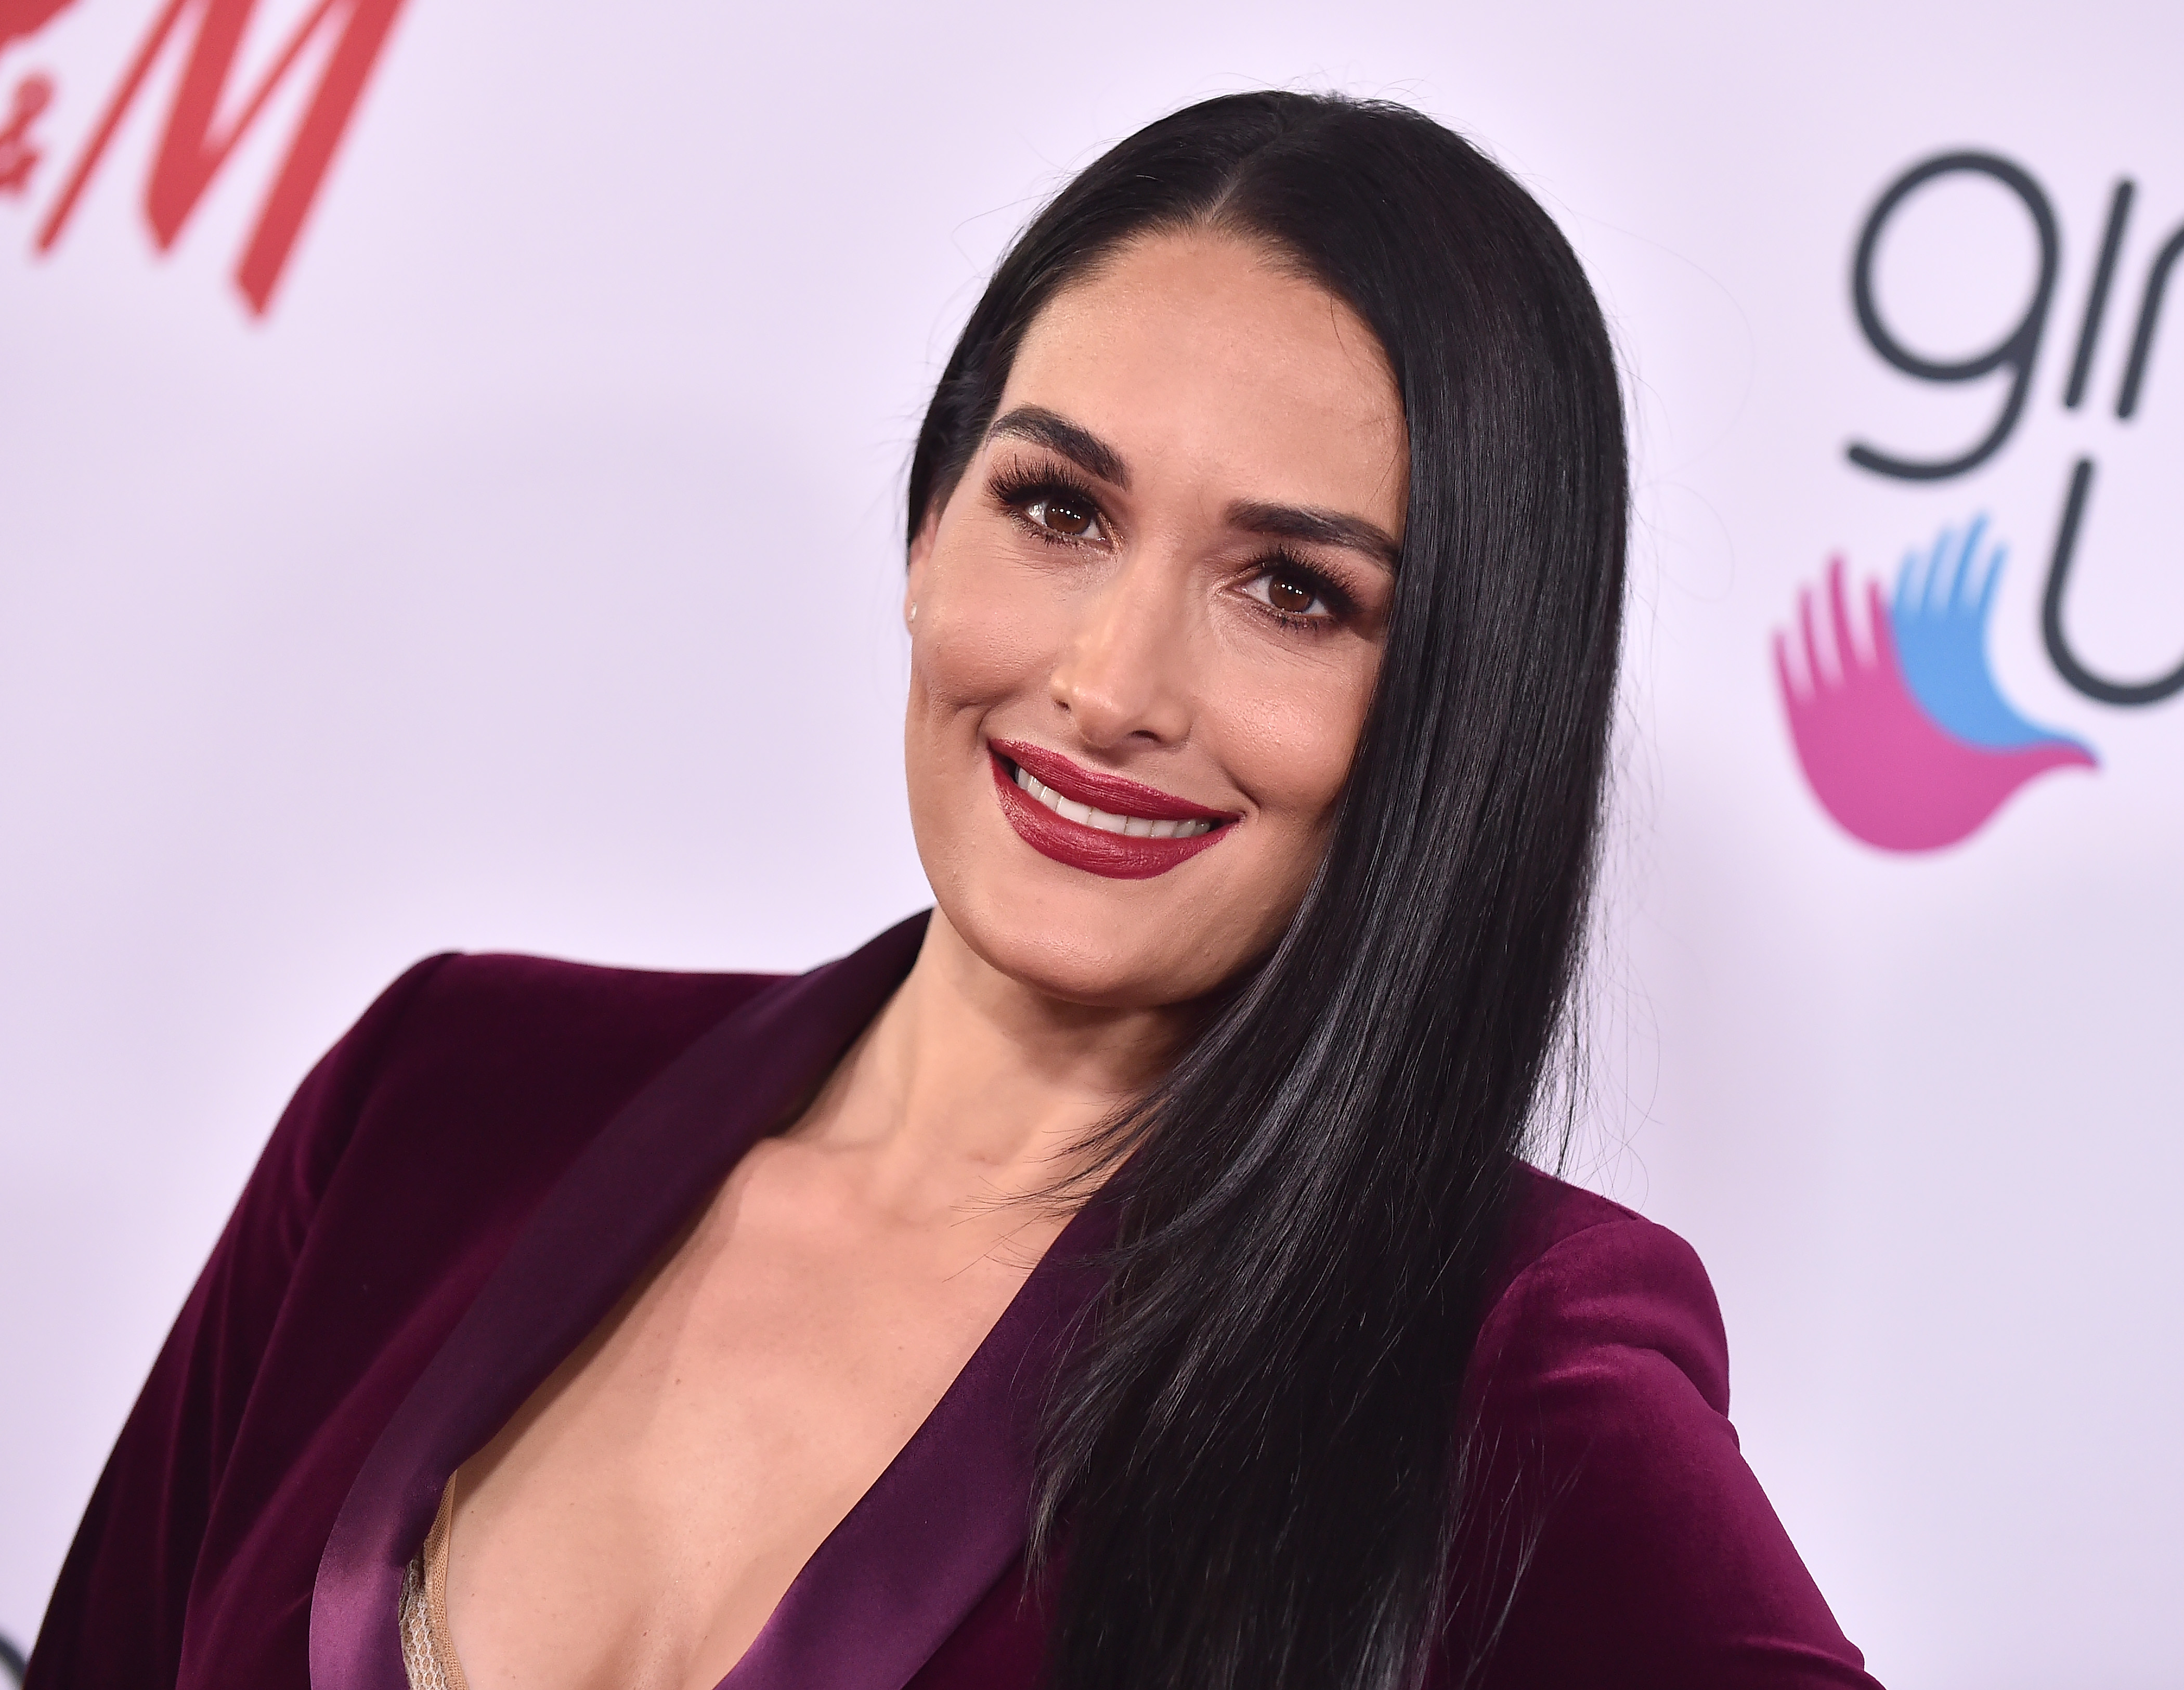 Nikki and Brie Bella Are Exiting WWE and Ditching Their Ring Names